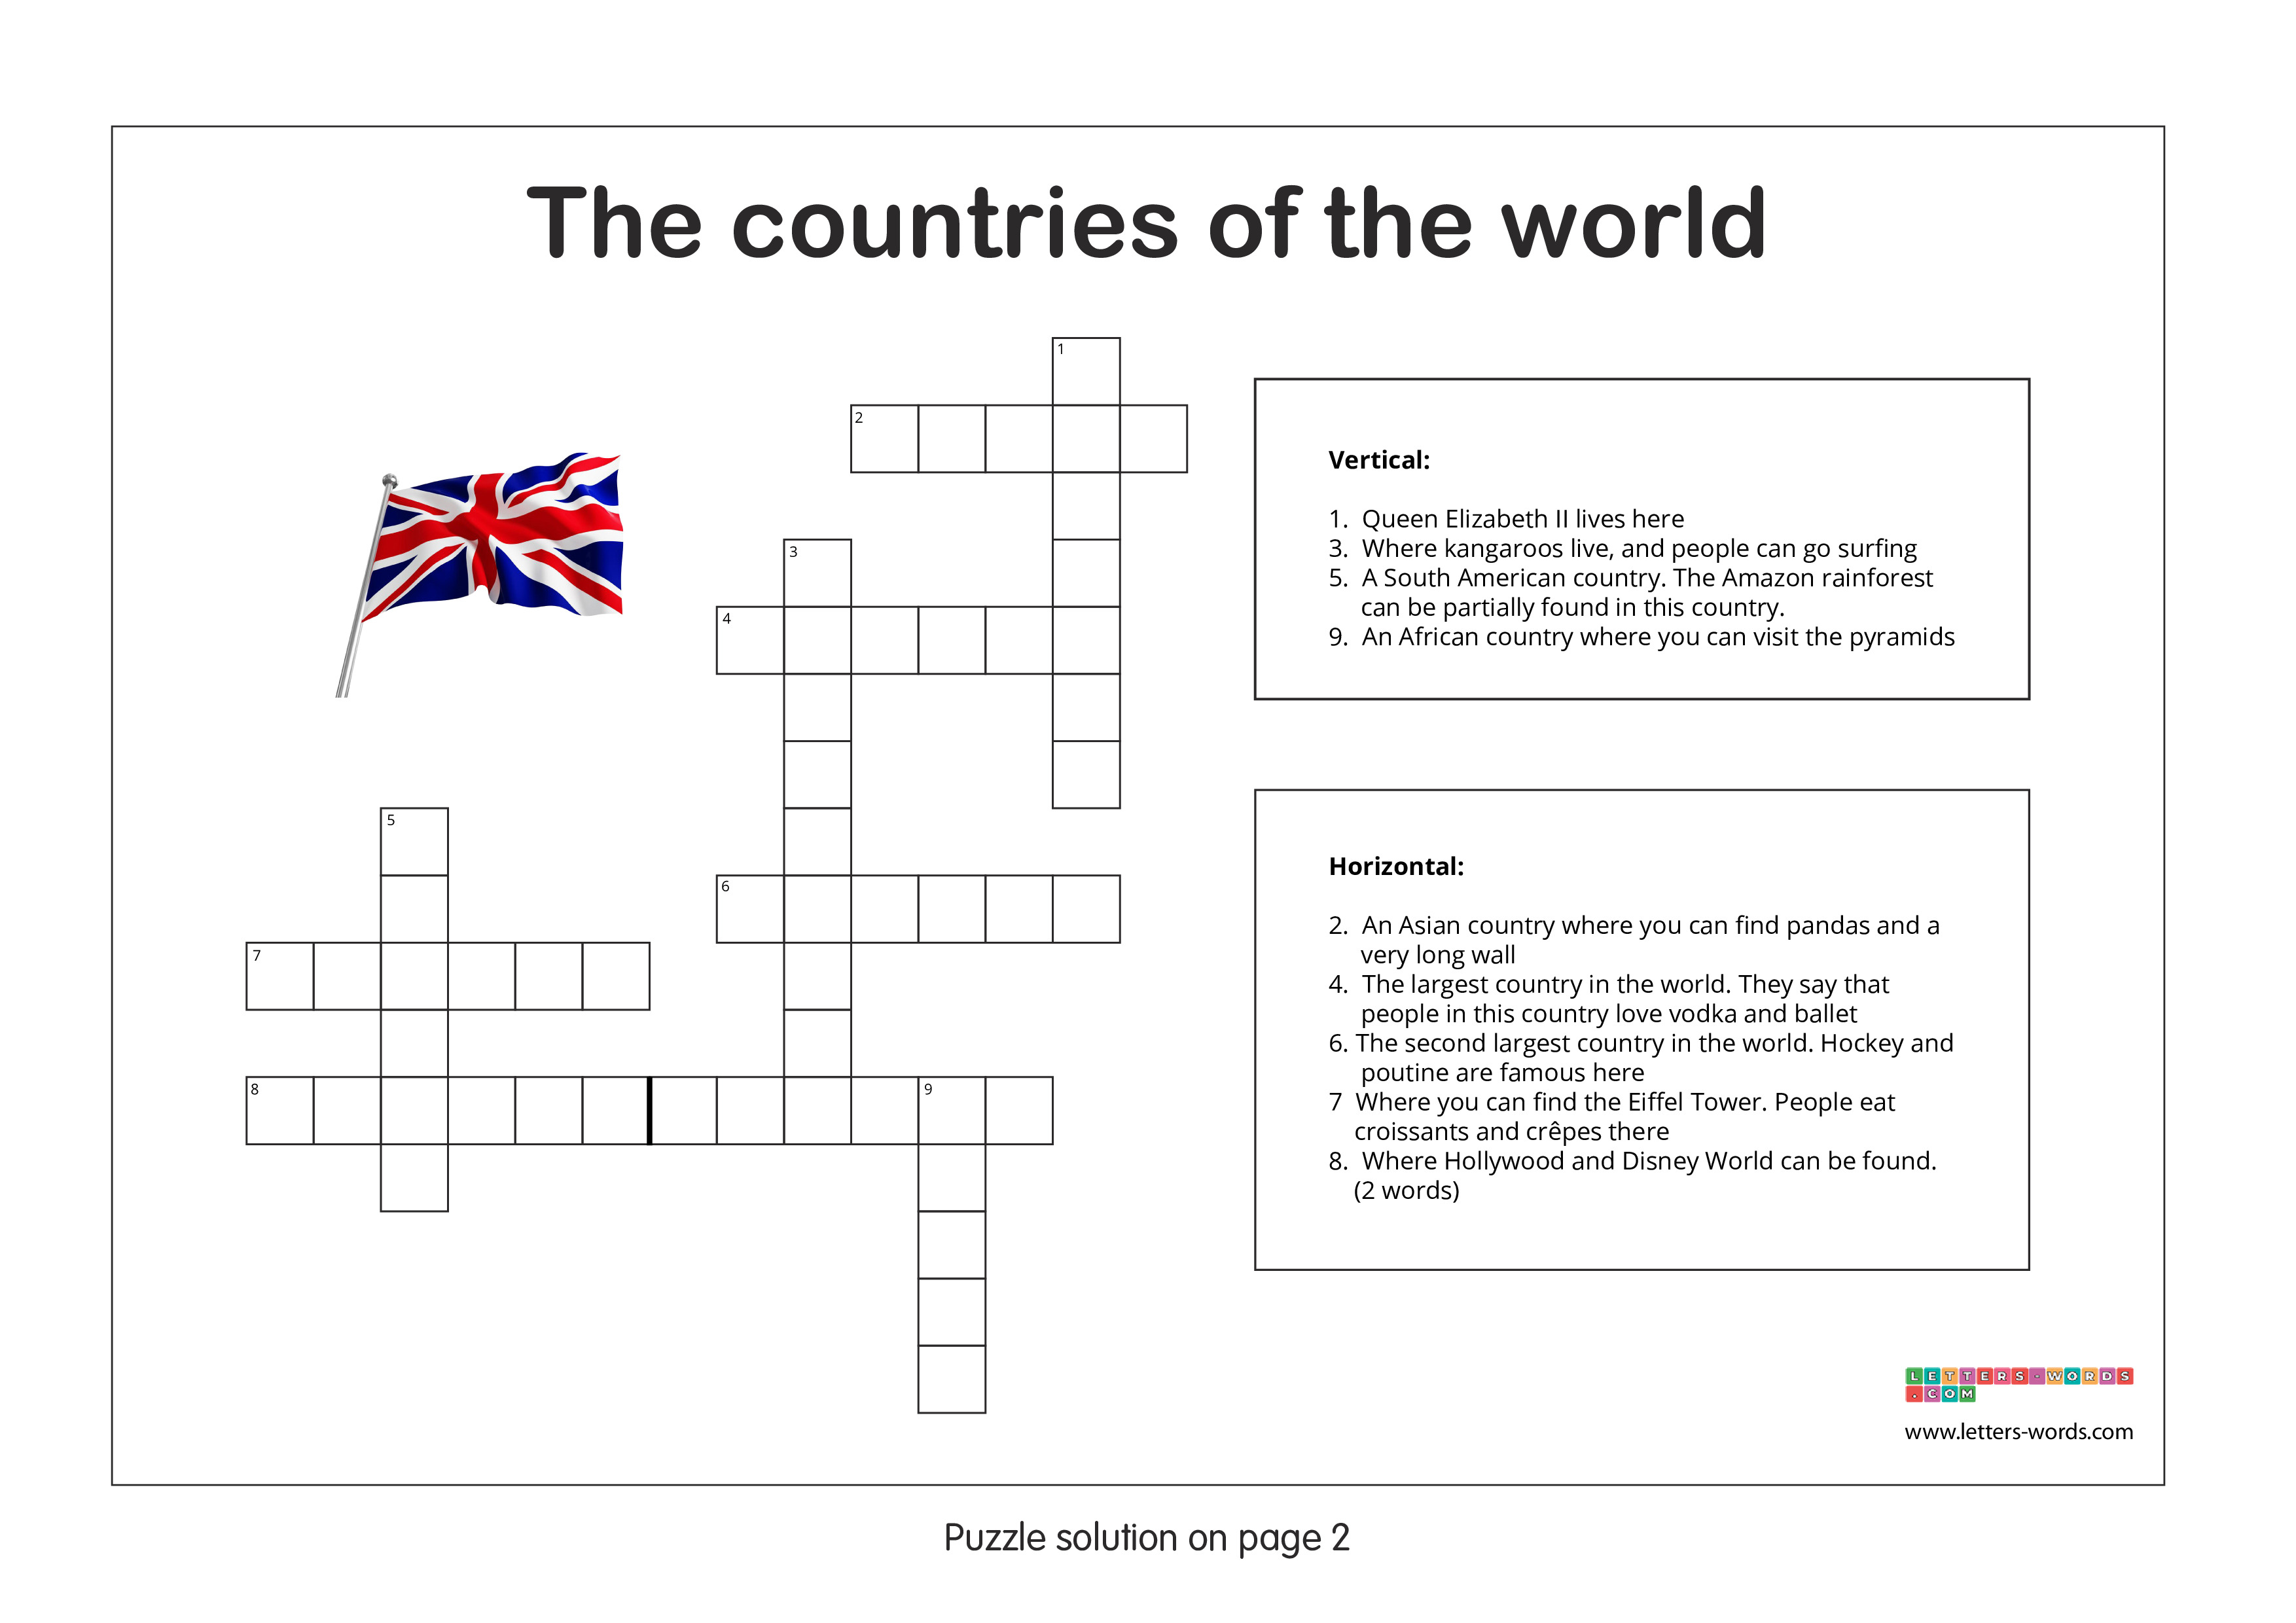 Crossword puzzles for children aged 10+ - The countries of the world